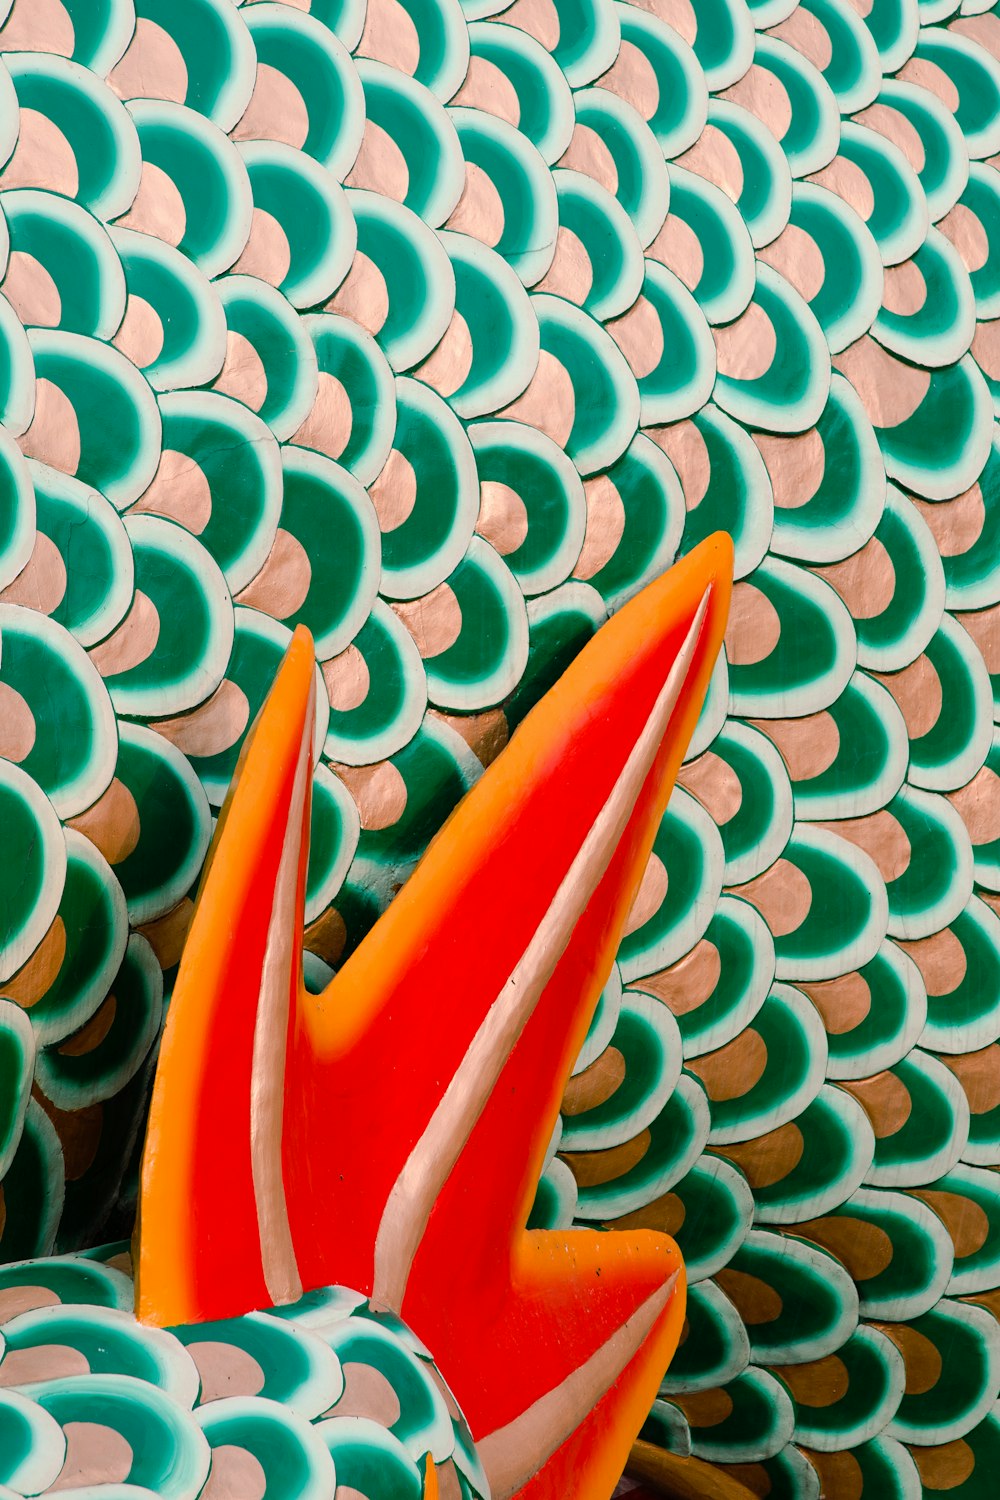 a close up of a red and orange object